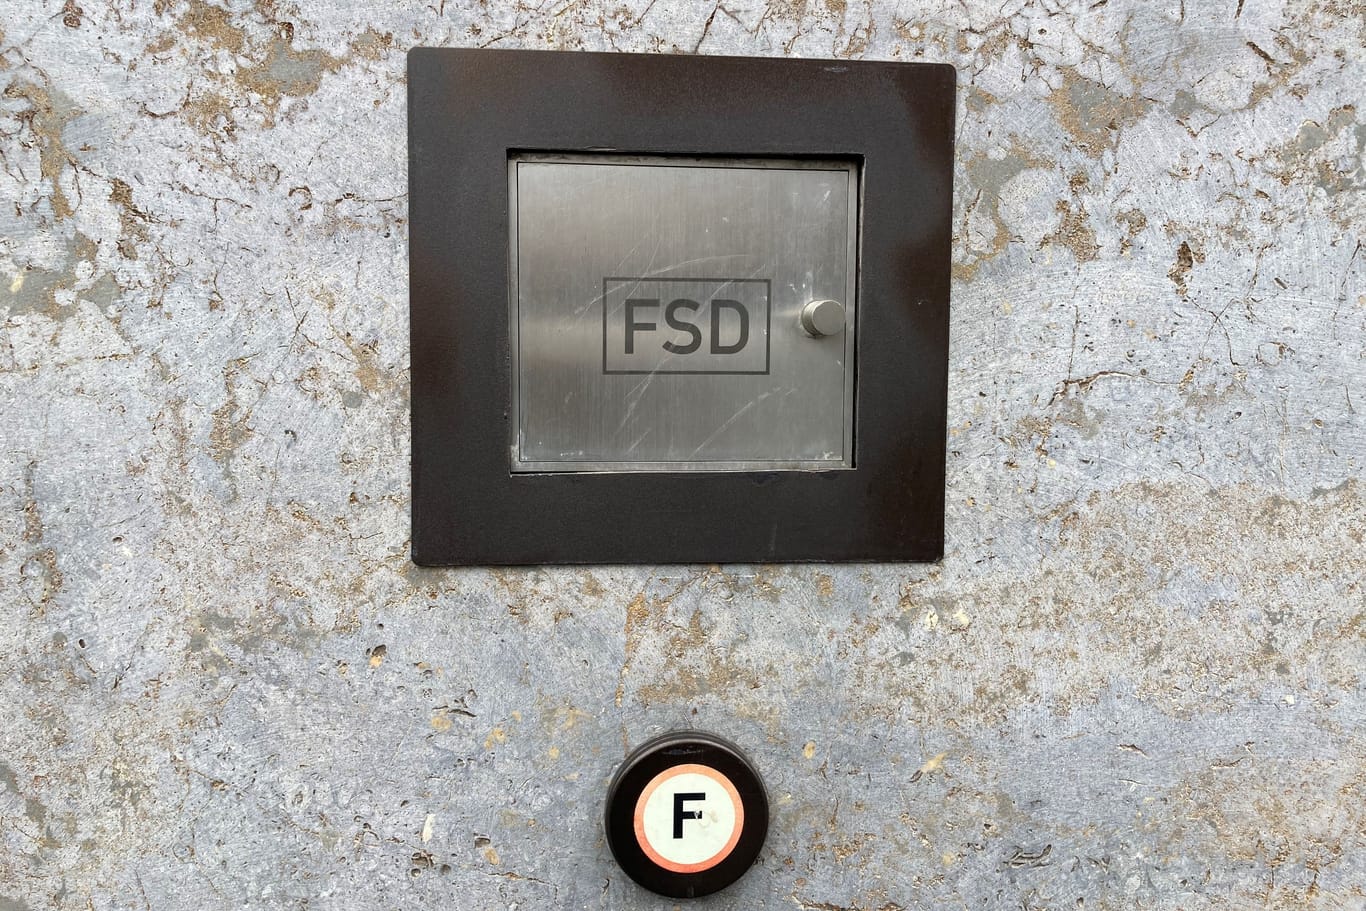 FSD: The lettering is either on a small compartment door or as a sign in the immediate vicinity of it.